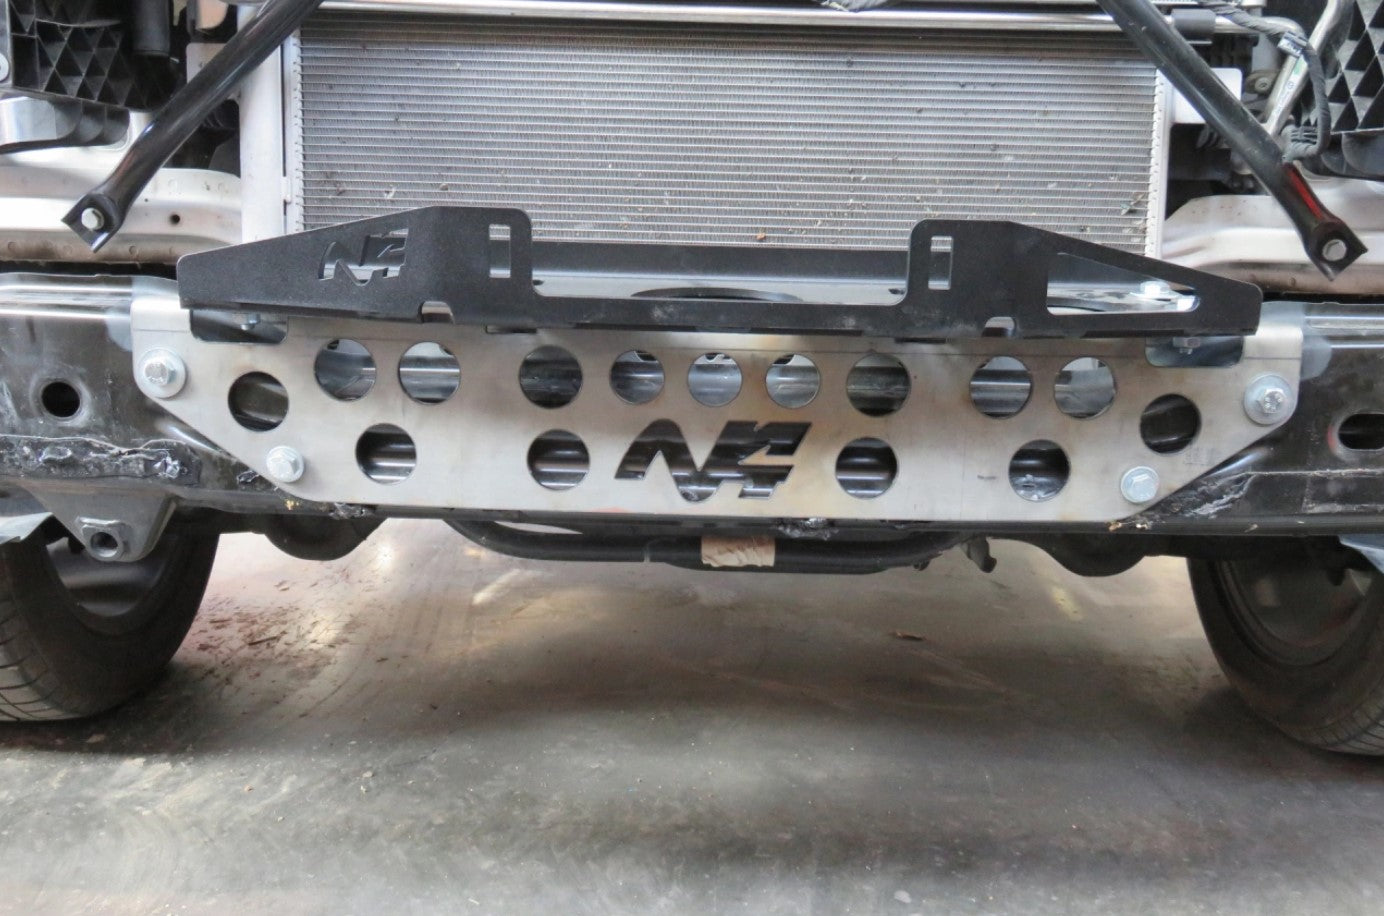 N4 winch plate mounted on vehicle front panel